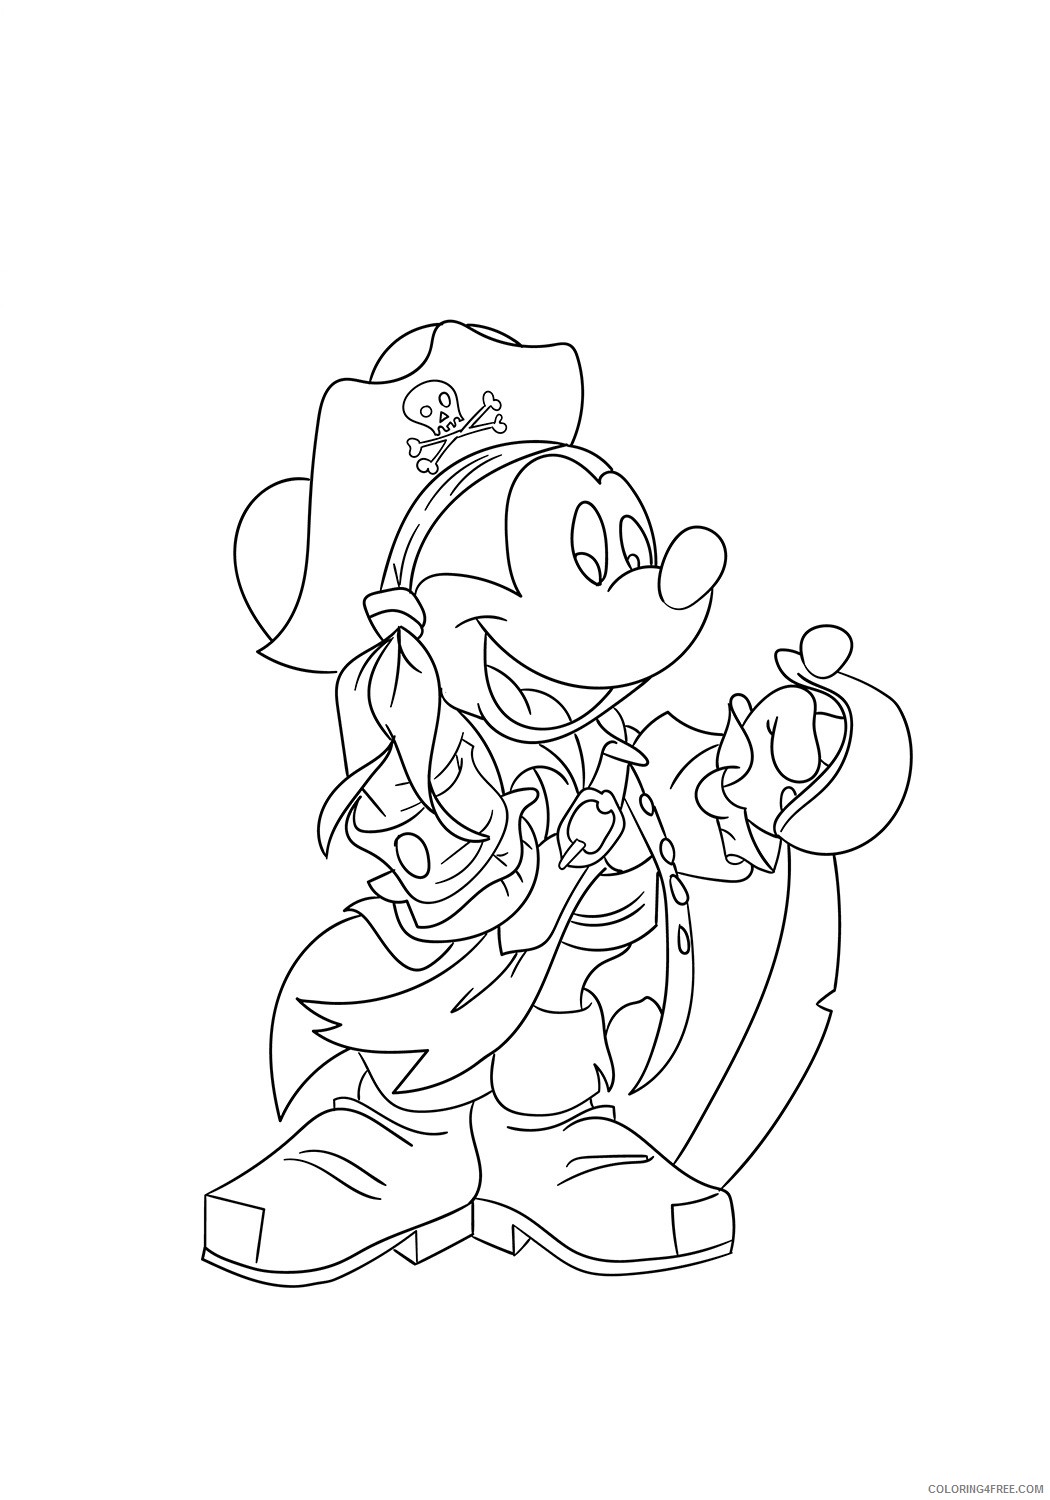 Mickey Mouse Coloring Pages Cartoons 1528100465_mickey as pirate 17 a4 Printable 2020 4040 Coloring4free